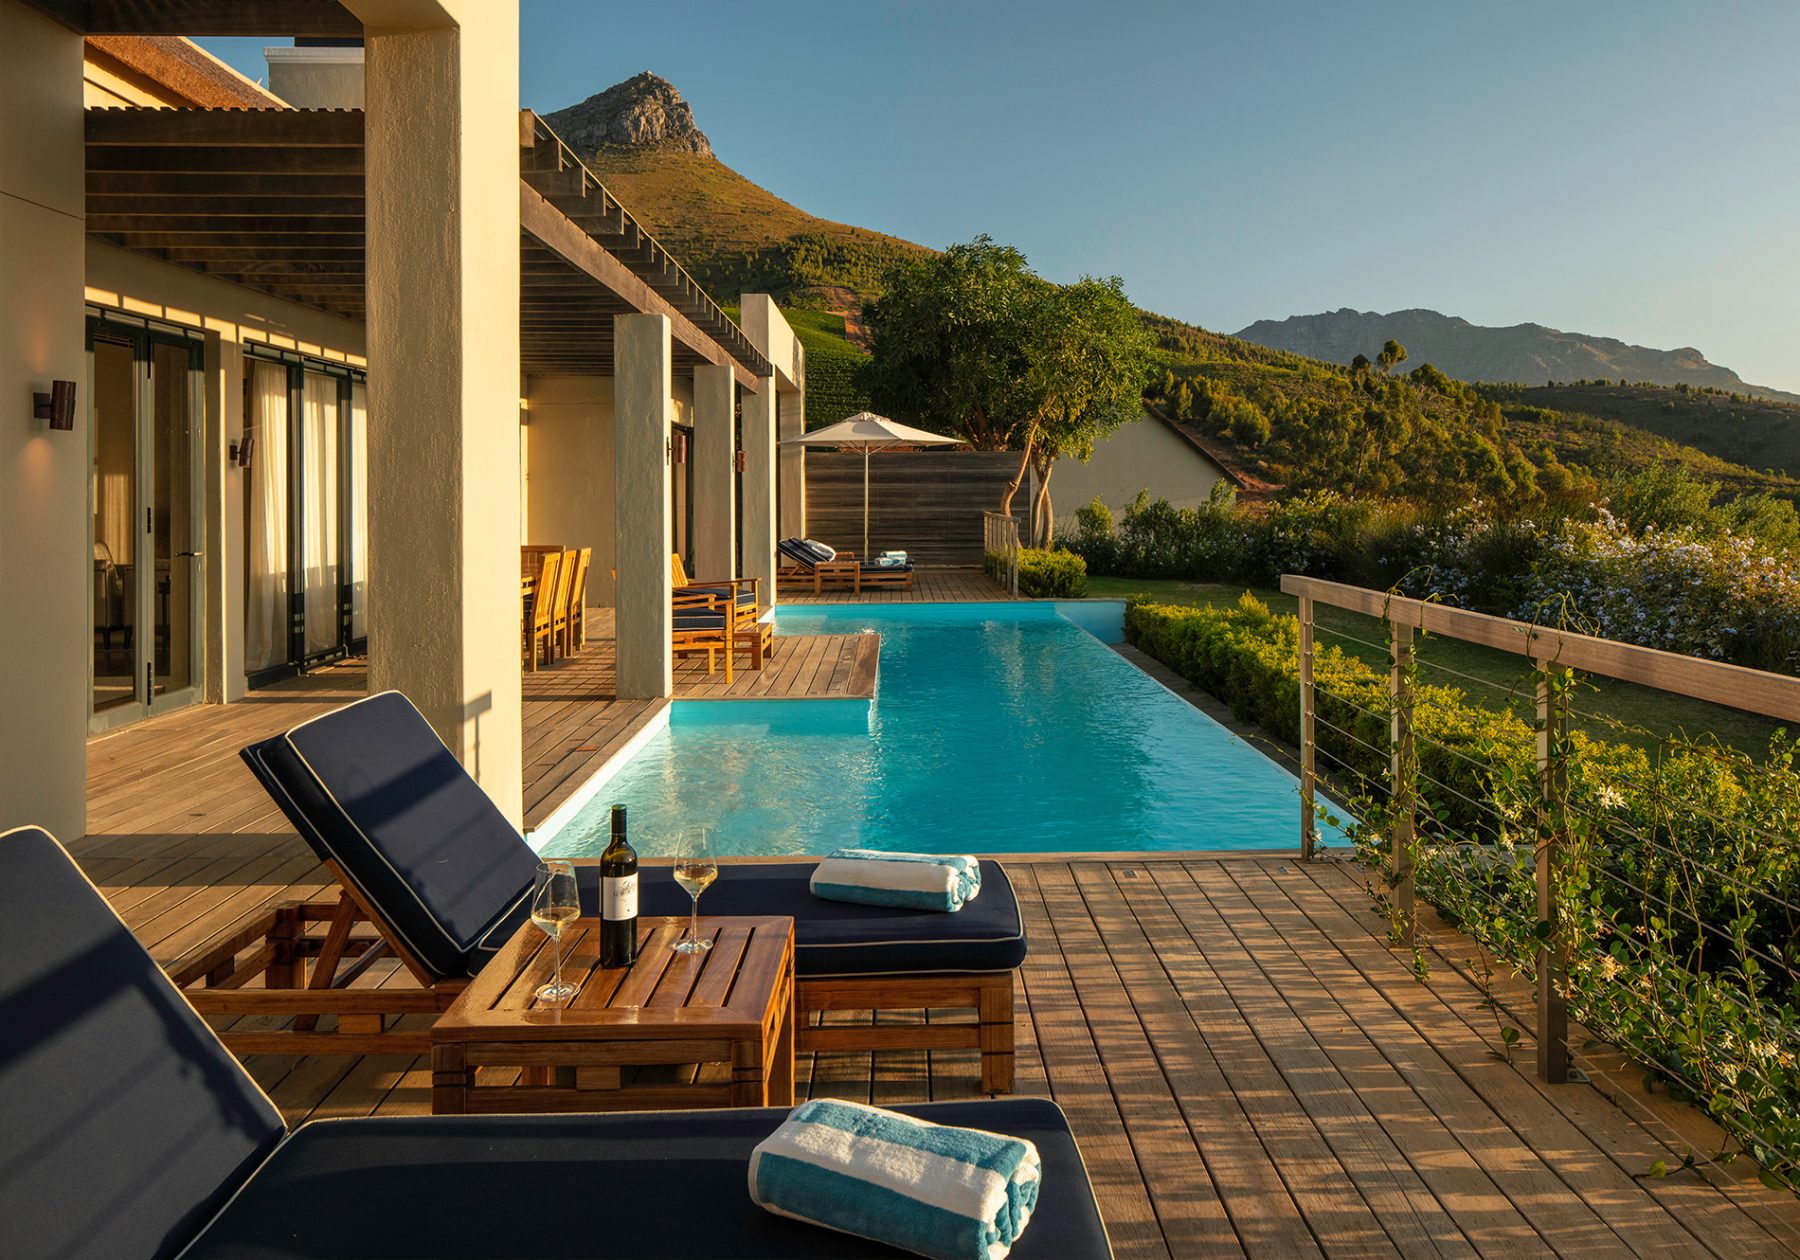 The Presidential Lodge 1 terrace and private pool overlooking the Stellenbosch Valley